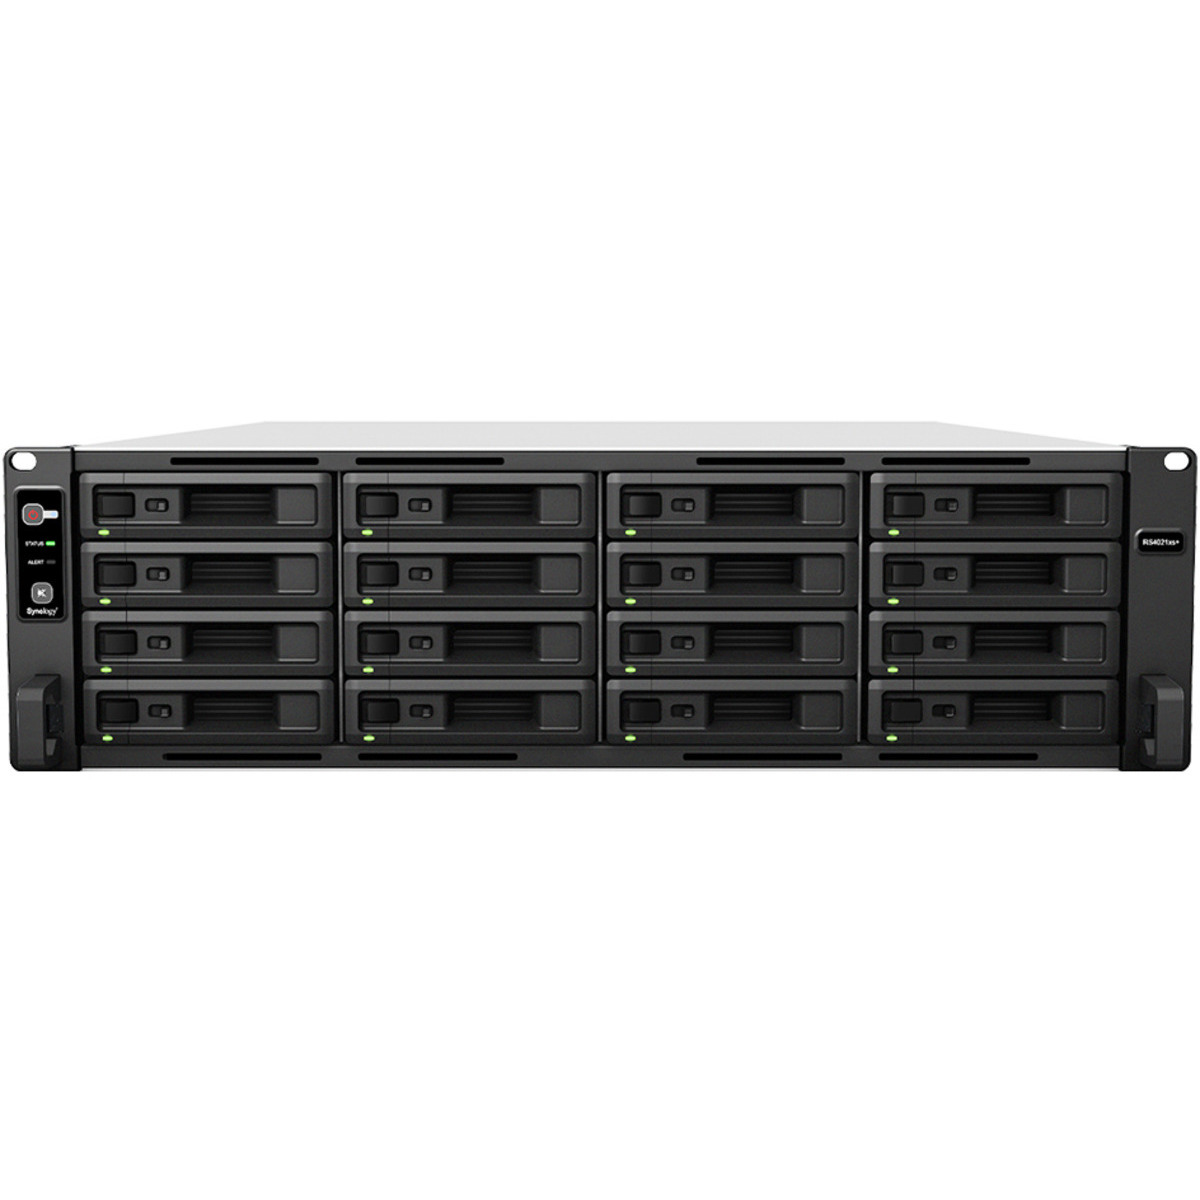 Synology RackStation RS4021xs+ 160tb 16-Bay RackMount Large Business / Enterprise NAS - Network Attached Storage Device 10x16tb Western Digital Ultrastar DC HC550 WUH721816ALE6L4 3.5 7200rpm SATA 6Gb/s HDD ENTERPRISE Class Drives Installed - Burn-In Tested RackStation RS4021xs+